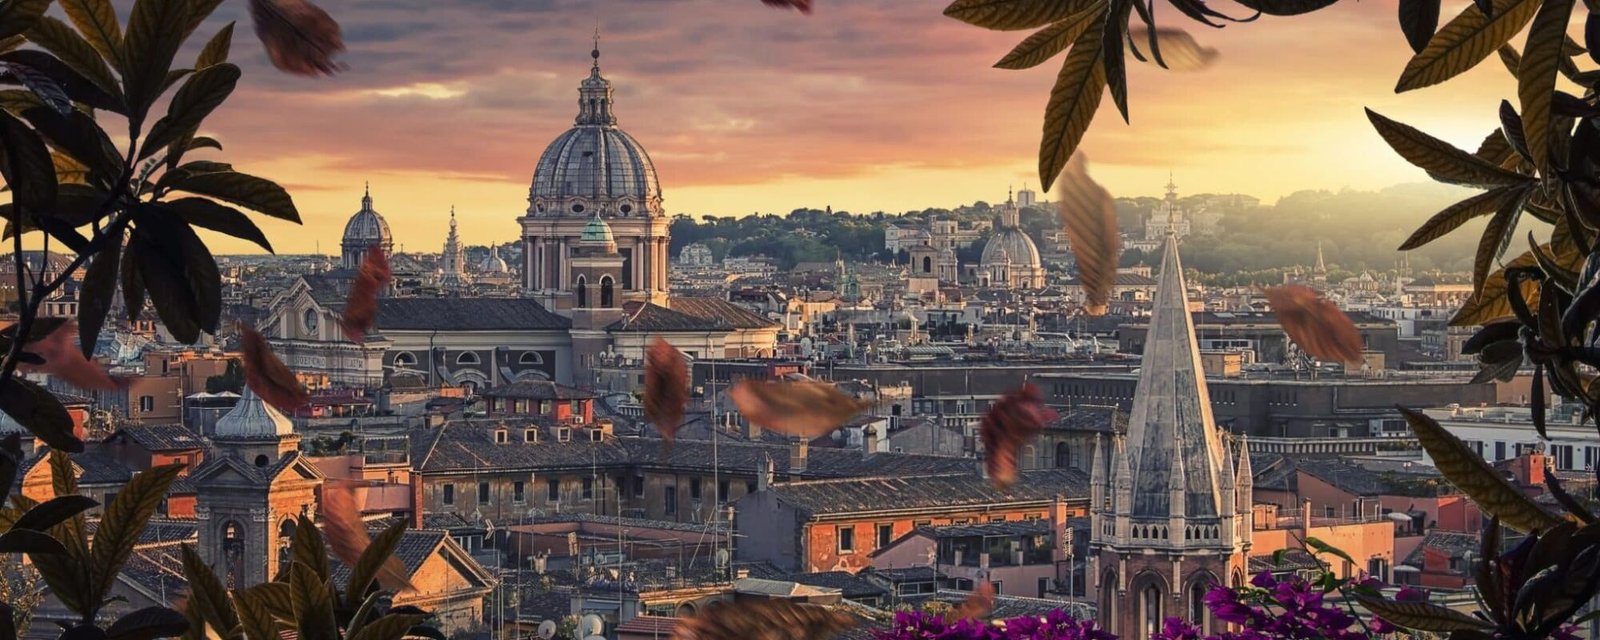 Beautiful sunset on the city of Rome in evening